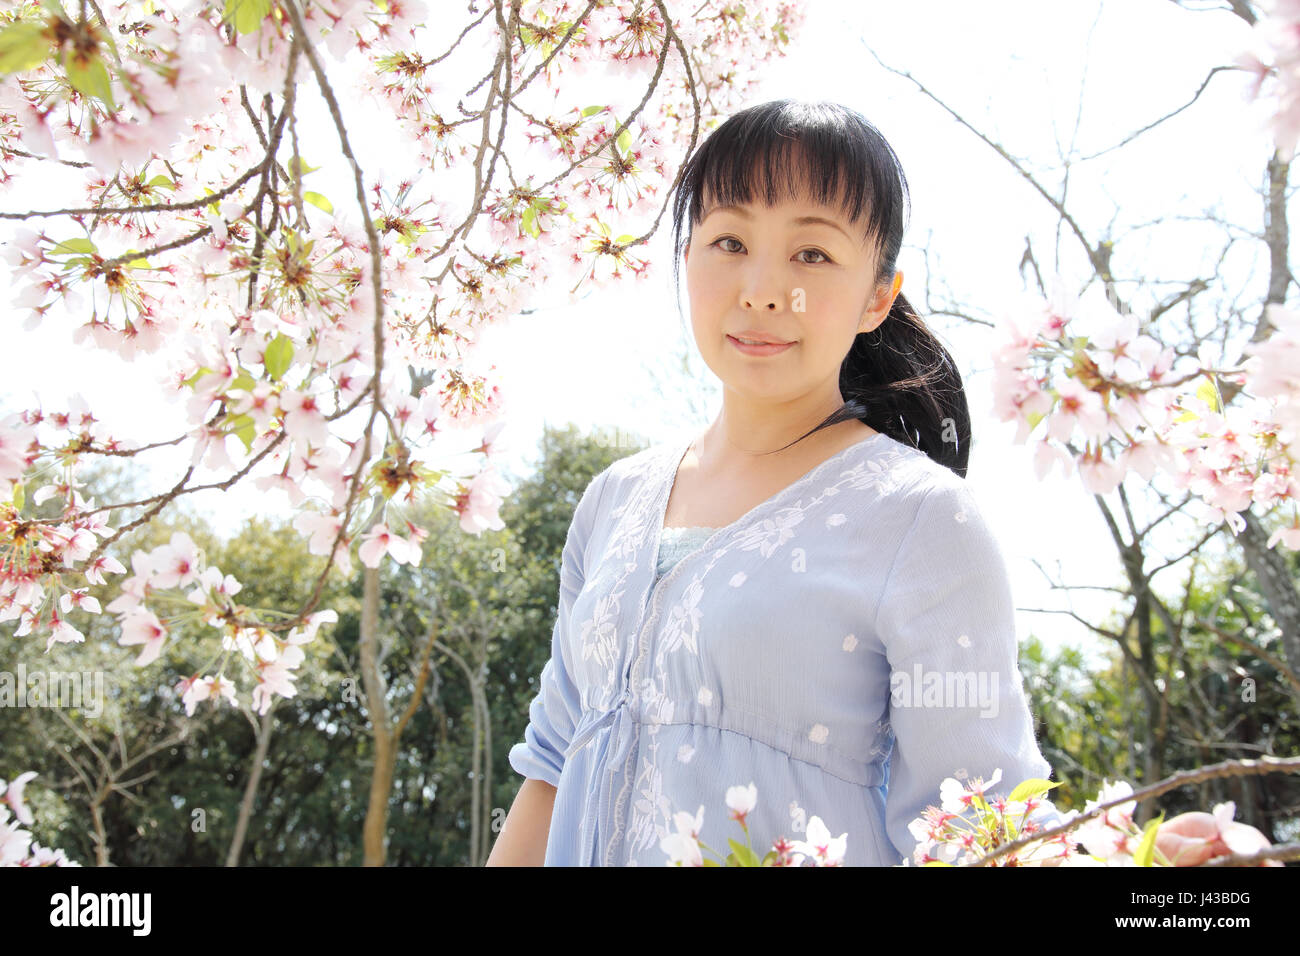 Portrait of young japanese woman with cherry blossom Stock Photo